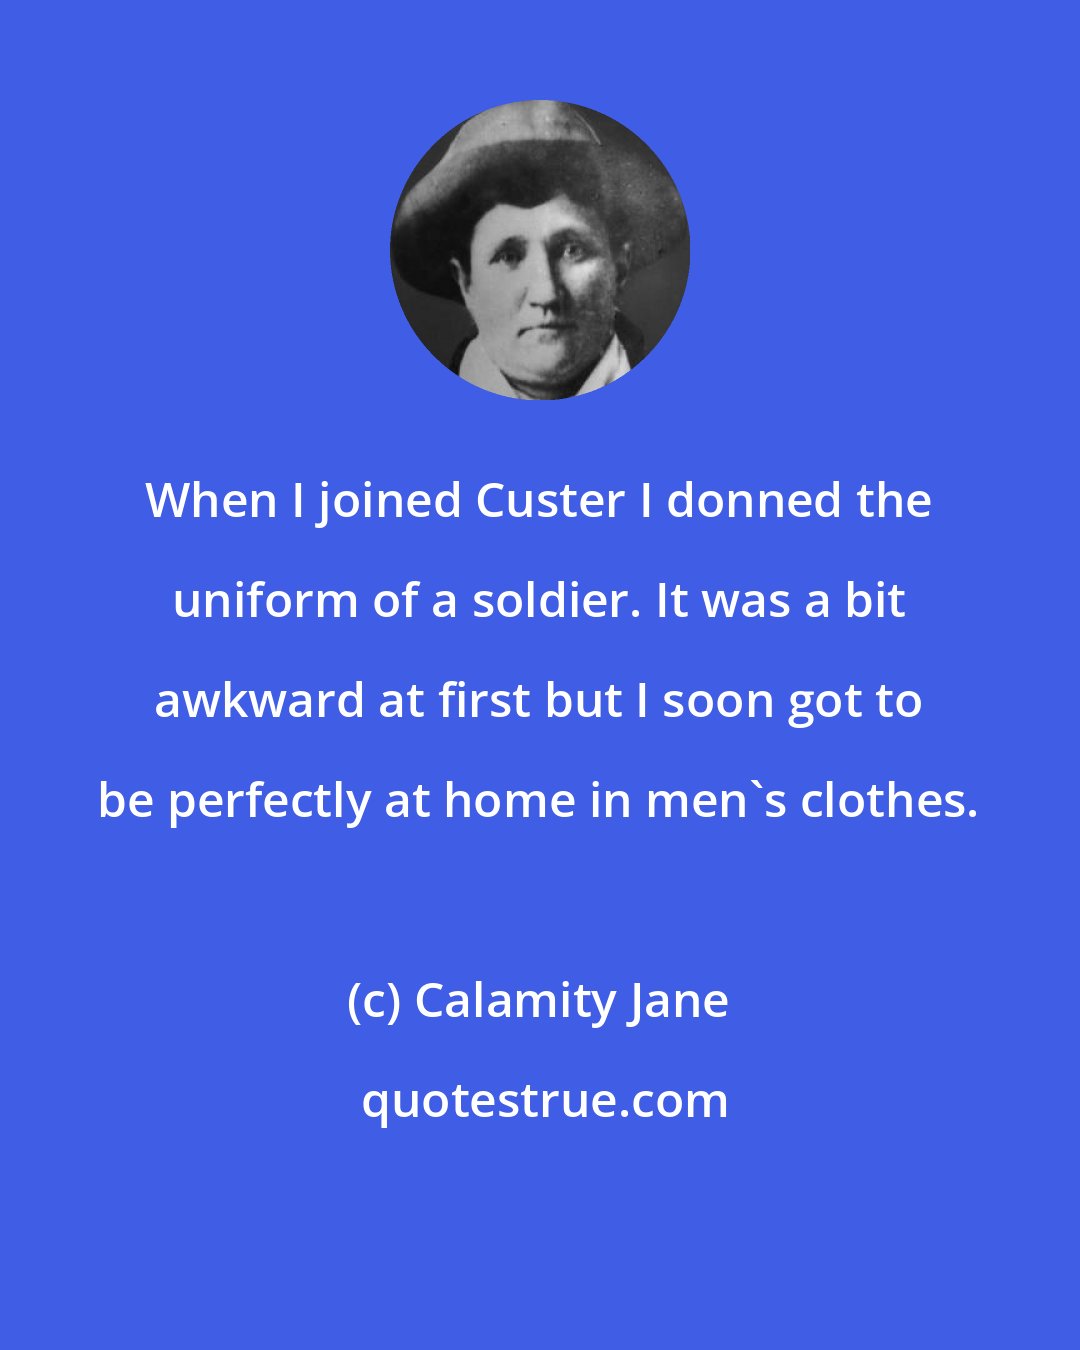 Calamity Jane: When I joined Custer I donned the uniform of a soldier. It was a bit awkward at first but I soon got to be perfectly at home in men's clothes.